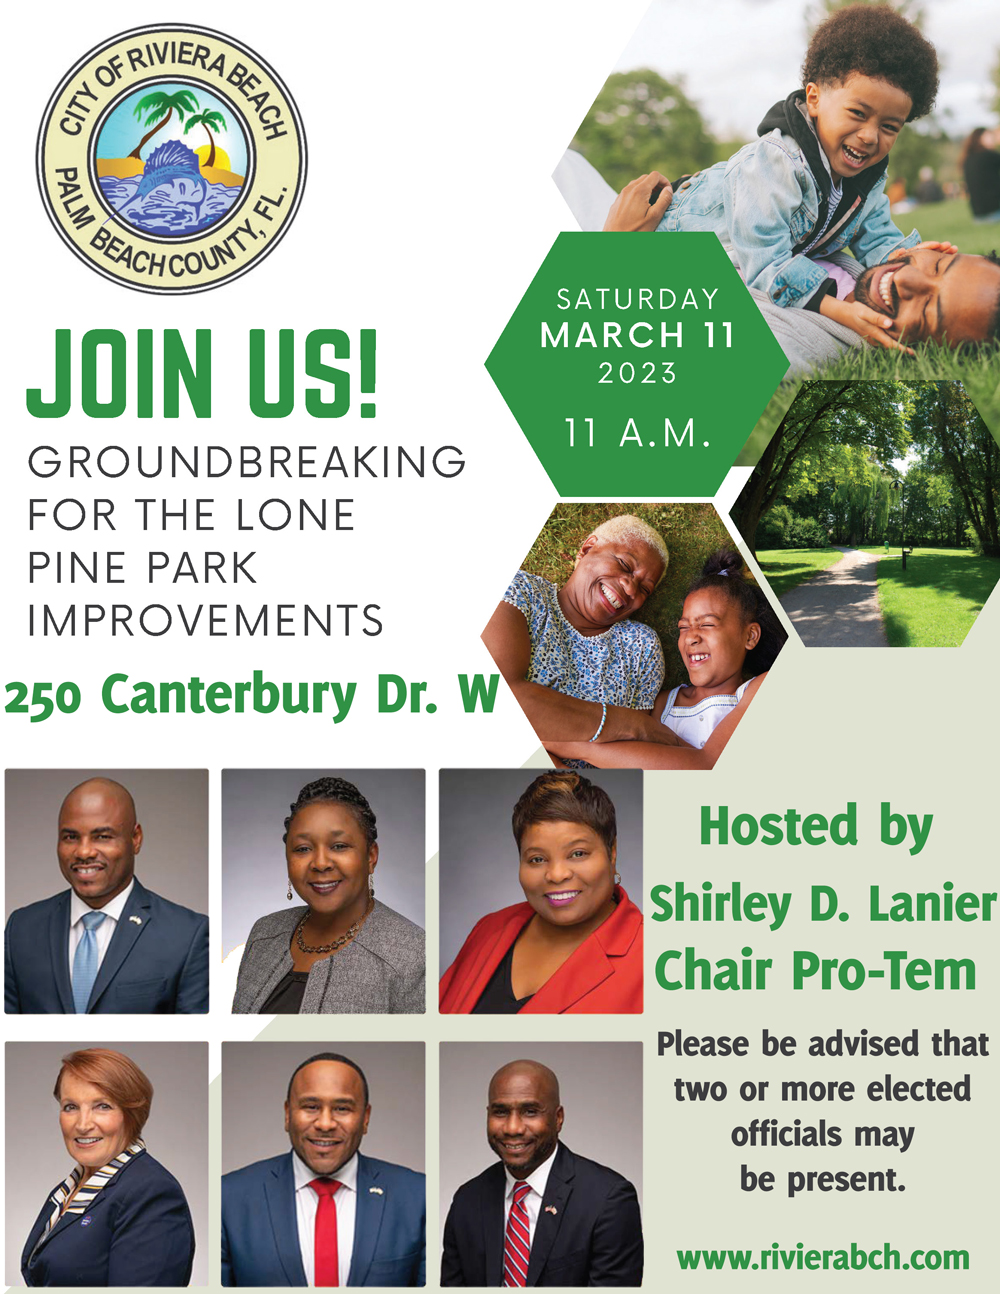 JOIN US! 1 1 A.M. GROUNDBREAKING FOR THE LONE PINE PARK IMPROVEMENTS Hosted by Shirley D. Lanier Chair Pro-Tem 250 Canterbury Dr. W Riviera Beach, FL 33407 SATURDAY MARCH 11 2023 JOIN US! 1 1 A.M.